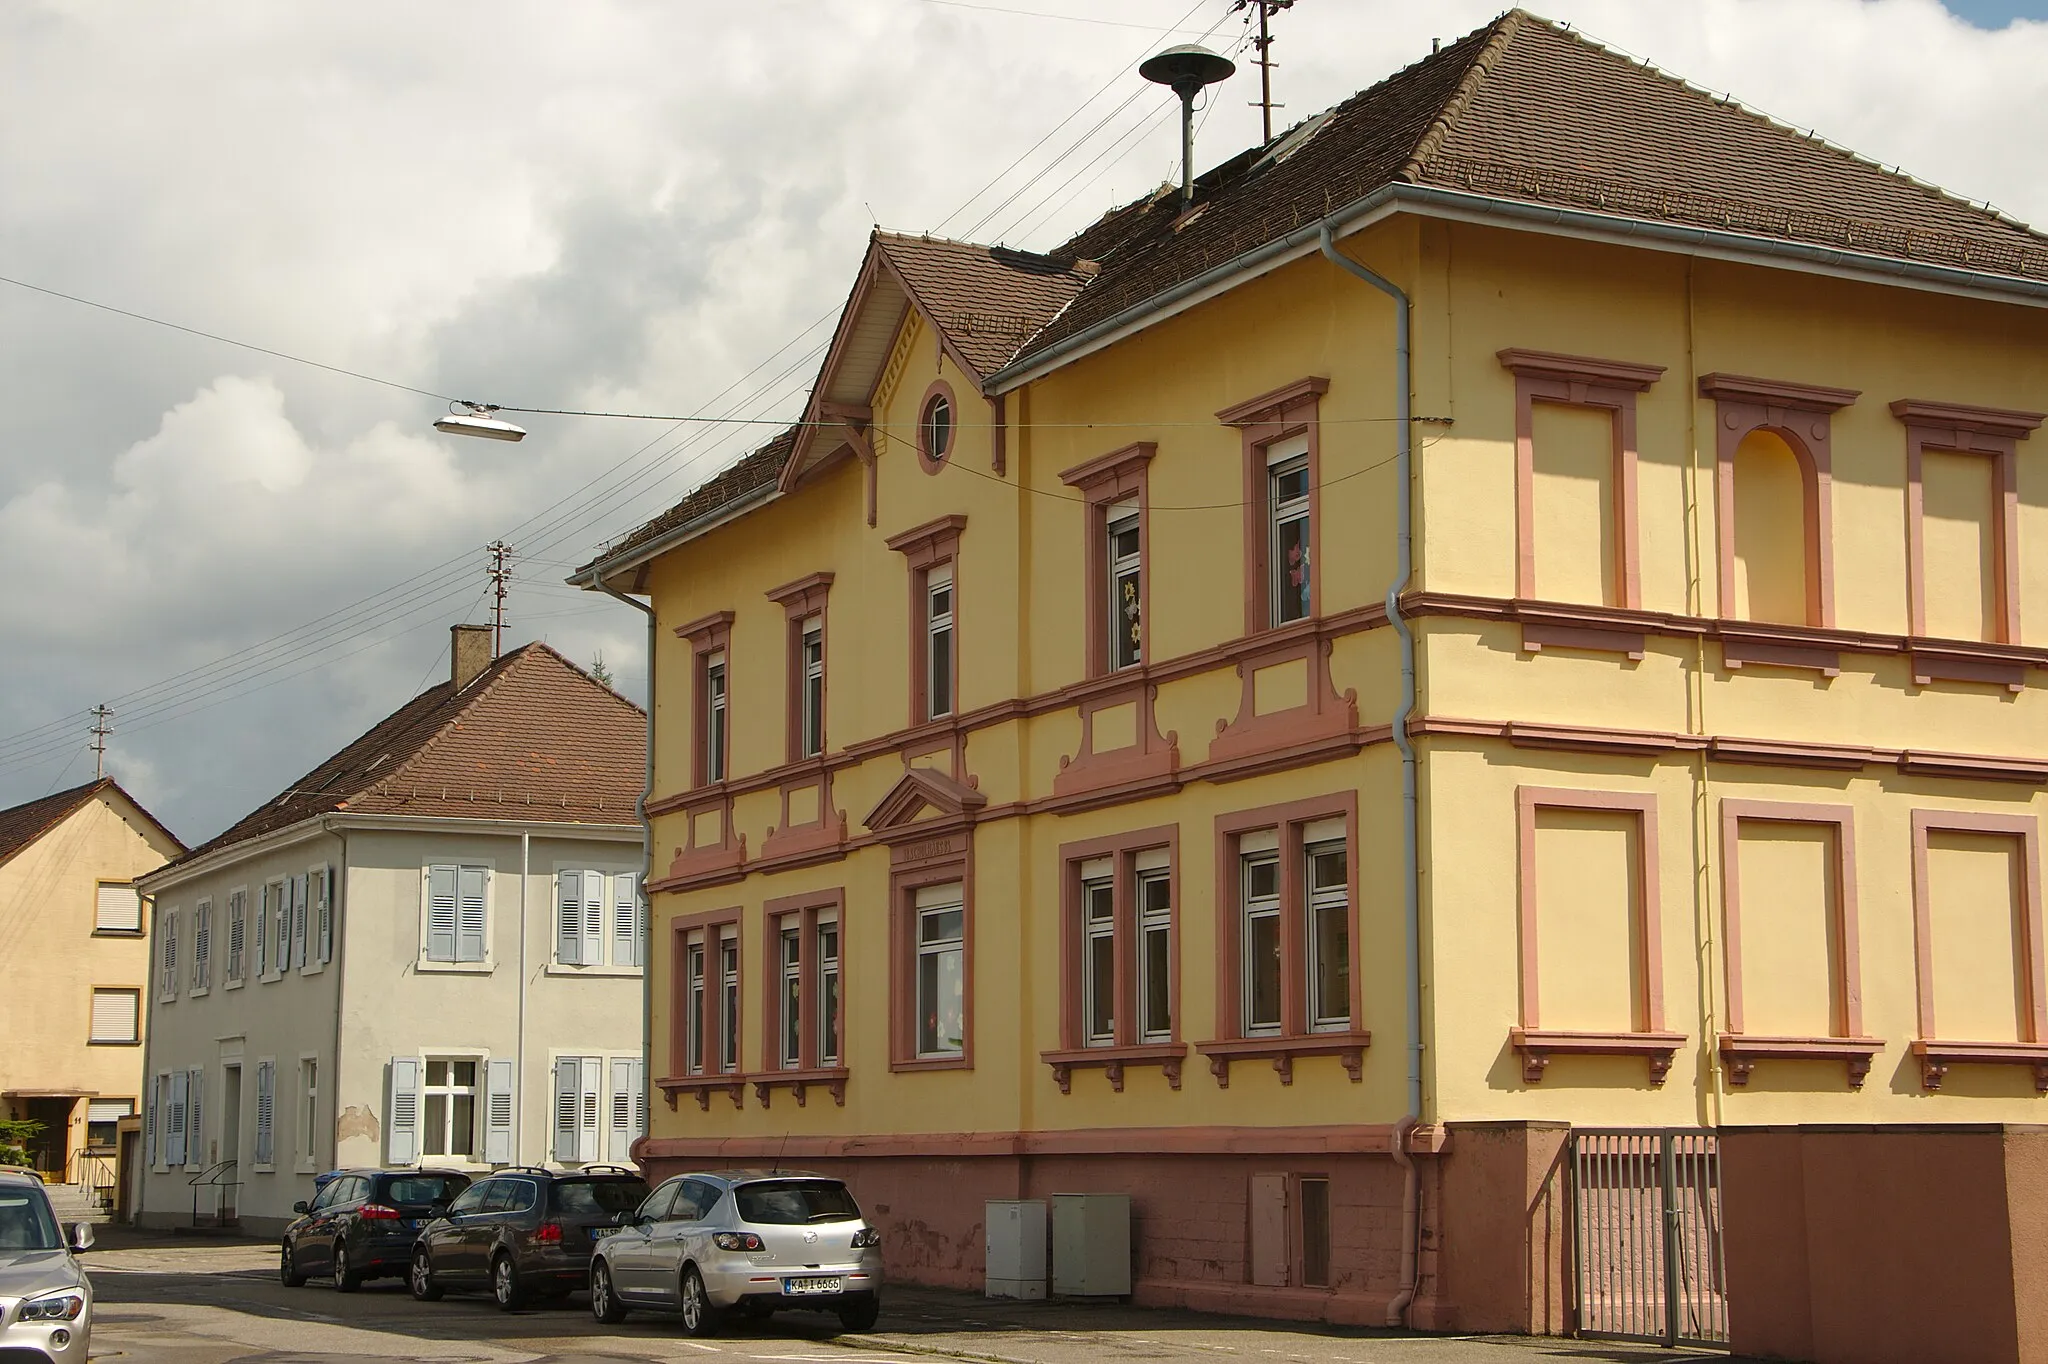 Photo showing: The Old (left) and the Middle Schoolhouse (right) in Karlsruhe-Hagsfeld, Germany